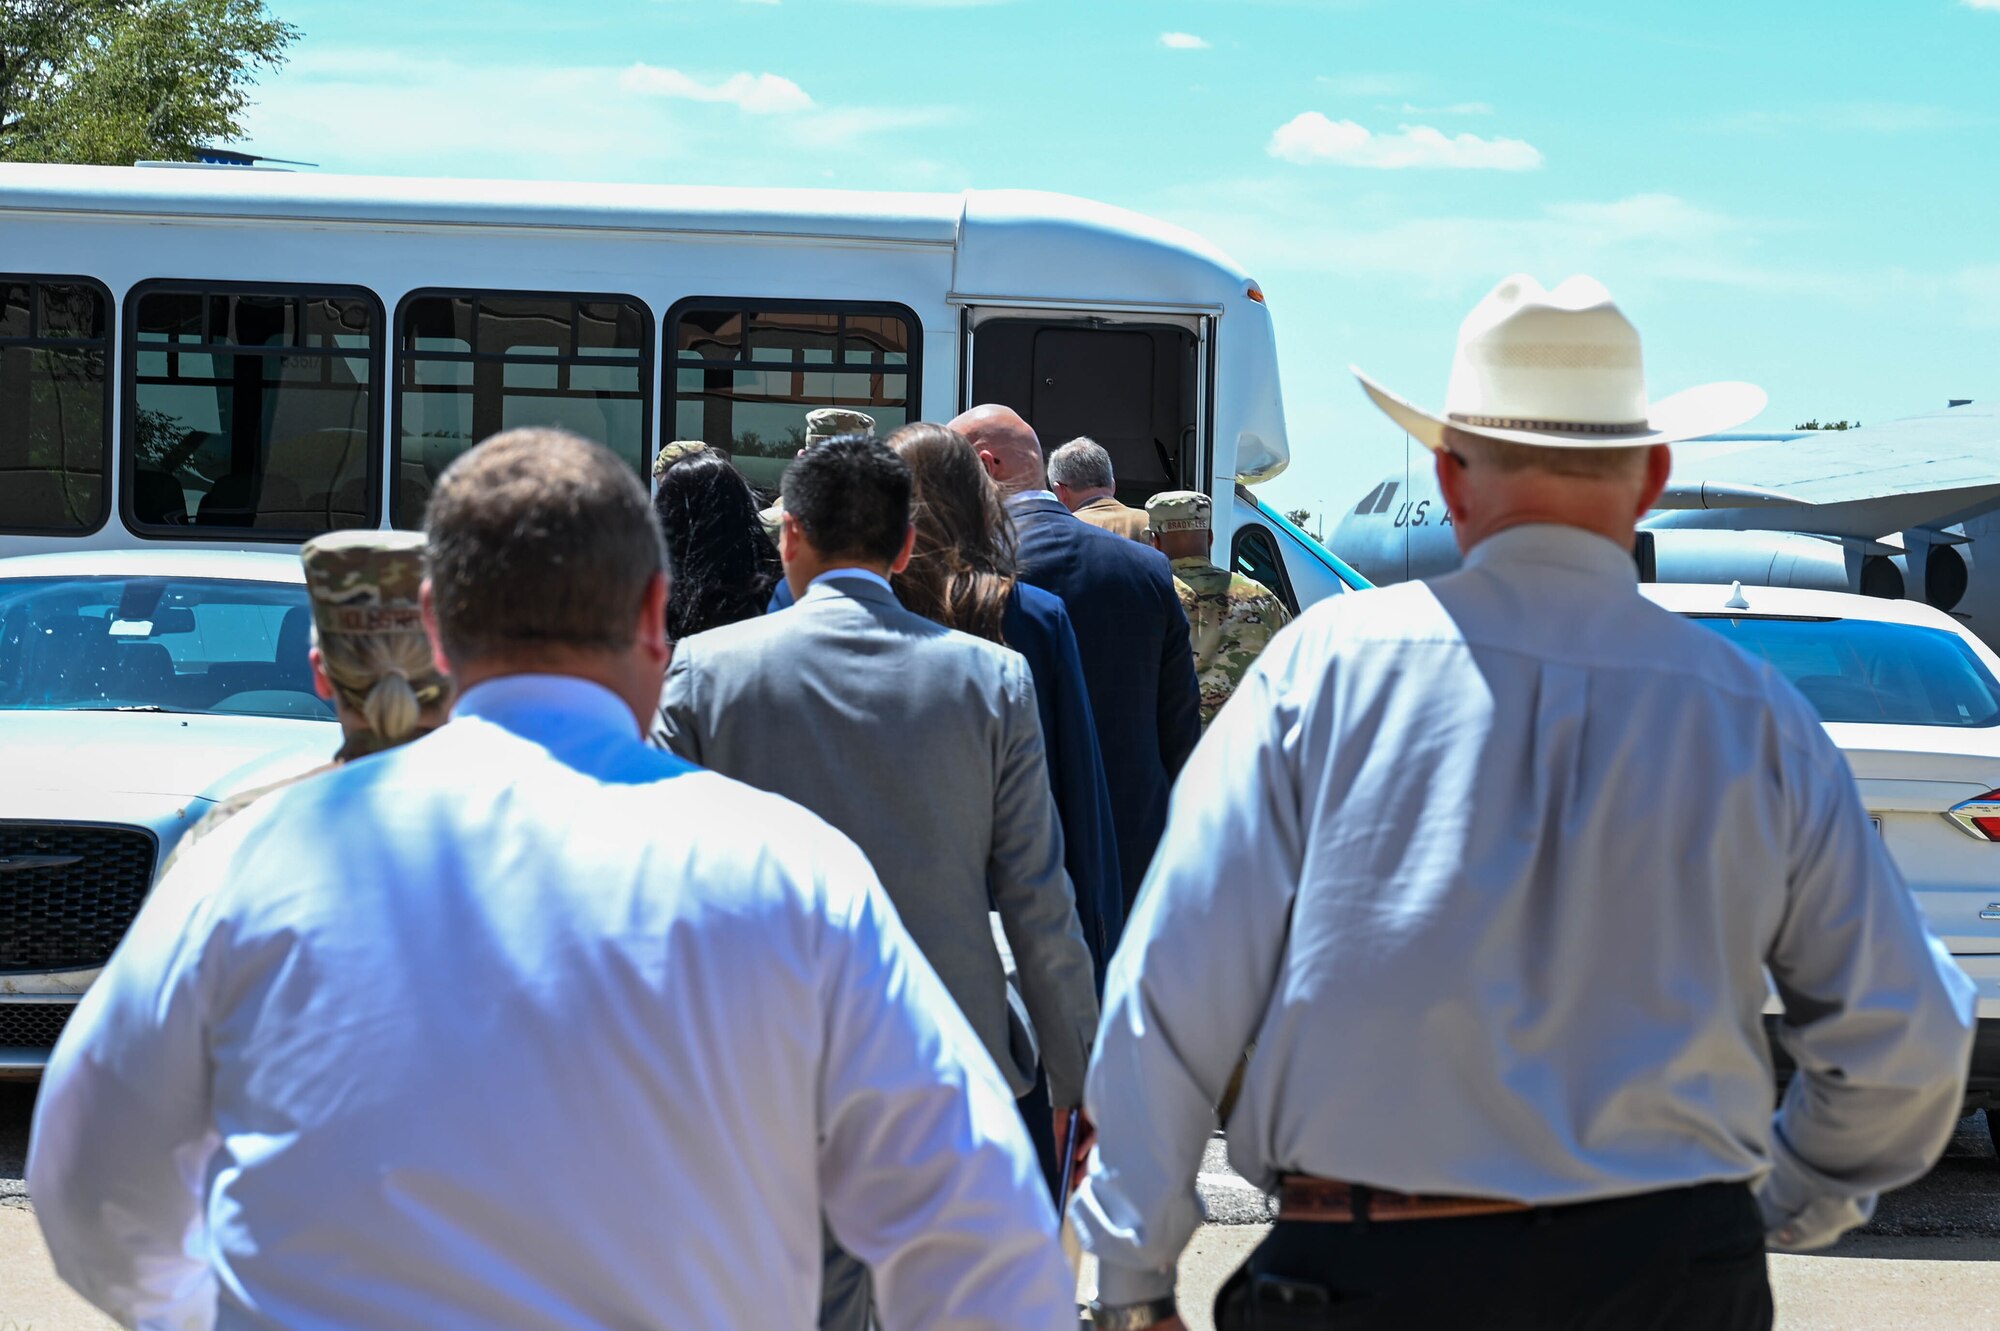 United States Representative Frank Lucas and his team are escorted to a bus by 97th Air Mobility Wing leaders at Altus Air Force Base (AFB), Oklahoma, Aug. 3, 2023. The visit was held to discuss the progress made at Altus AFB since Lucas’ last visit in 2022. (U.S. Air Force photo by Airman 1st Class Heidi Bucins)